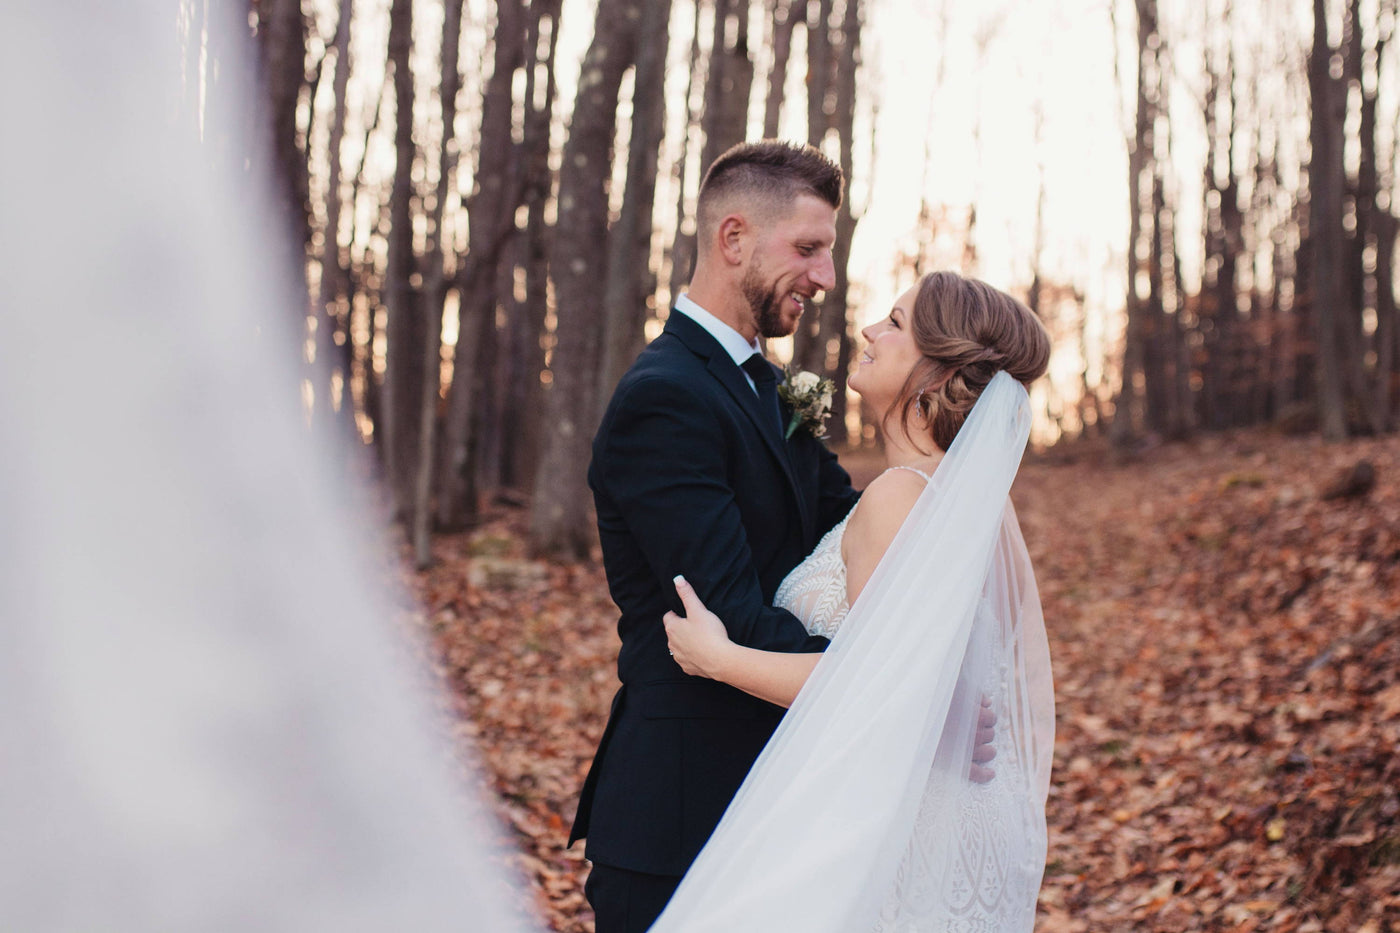 Henne Engagement Ring Couple Steve & Kira Share a Sweet Moment in the Woods on Their Wedding Day